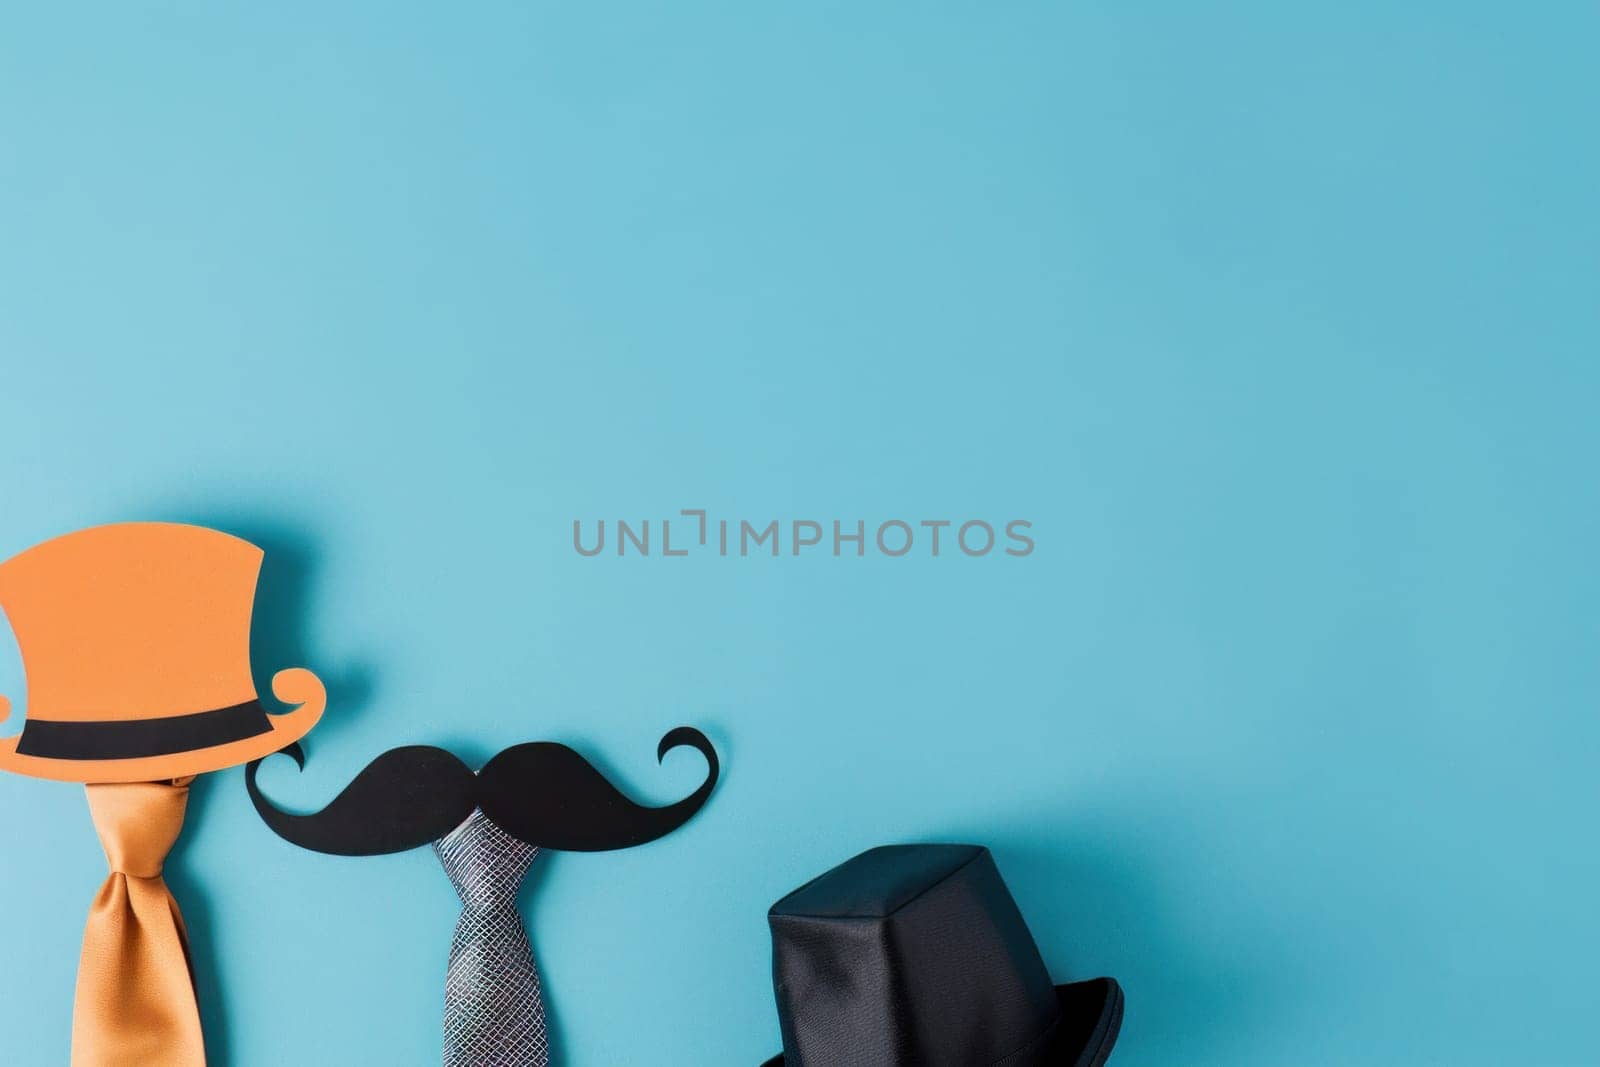 Stylish hats, tie, mustache and top hat copy paper cutout on blue background for fashion and travel theme